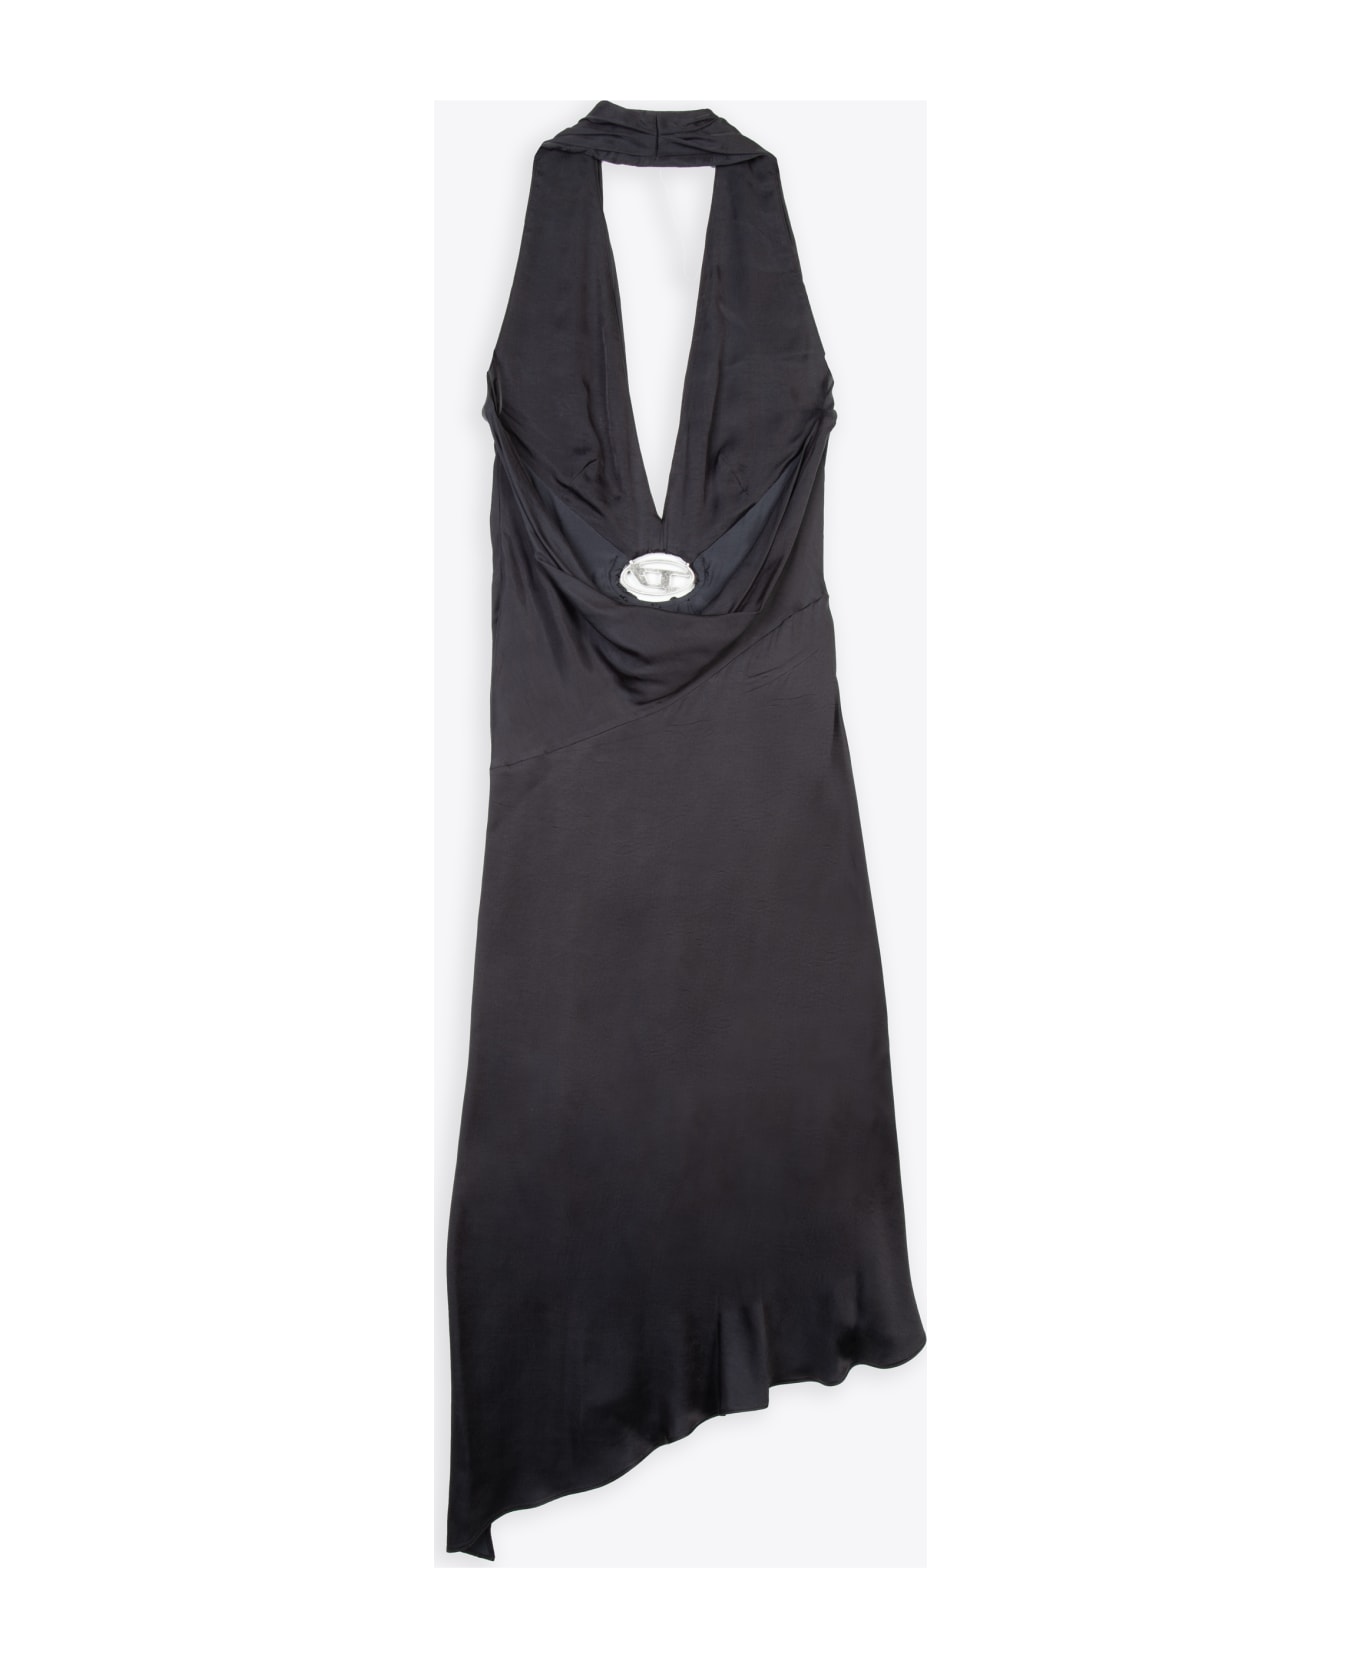 Diesel D-stant-n1 Black satin midi draped dress with Oval D - D Stant - Nero ワンピース＆ドレス